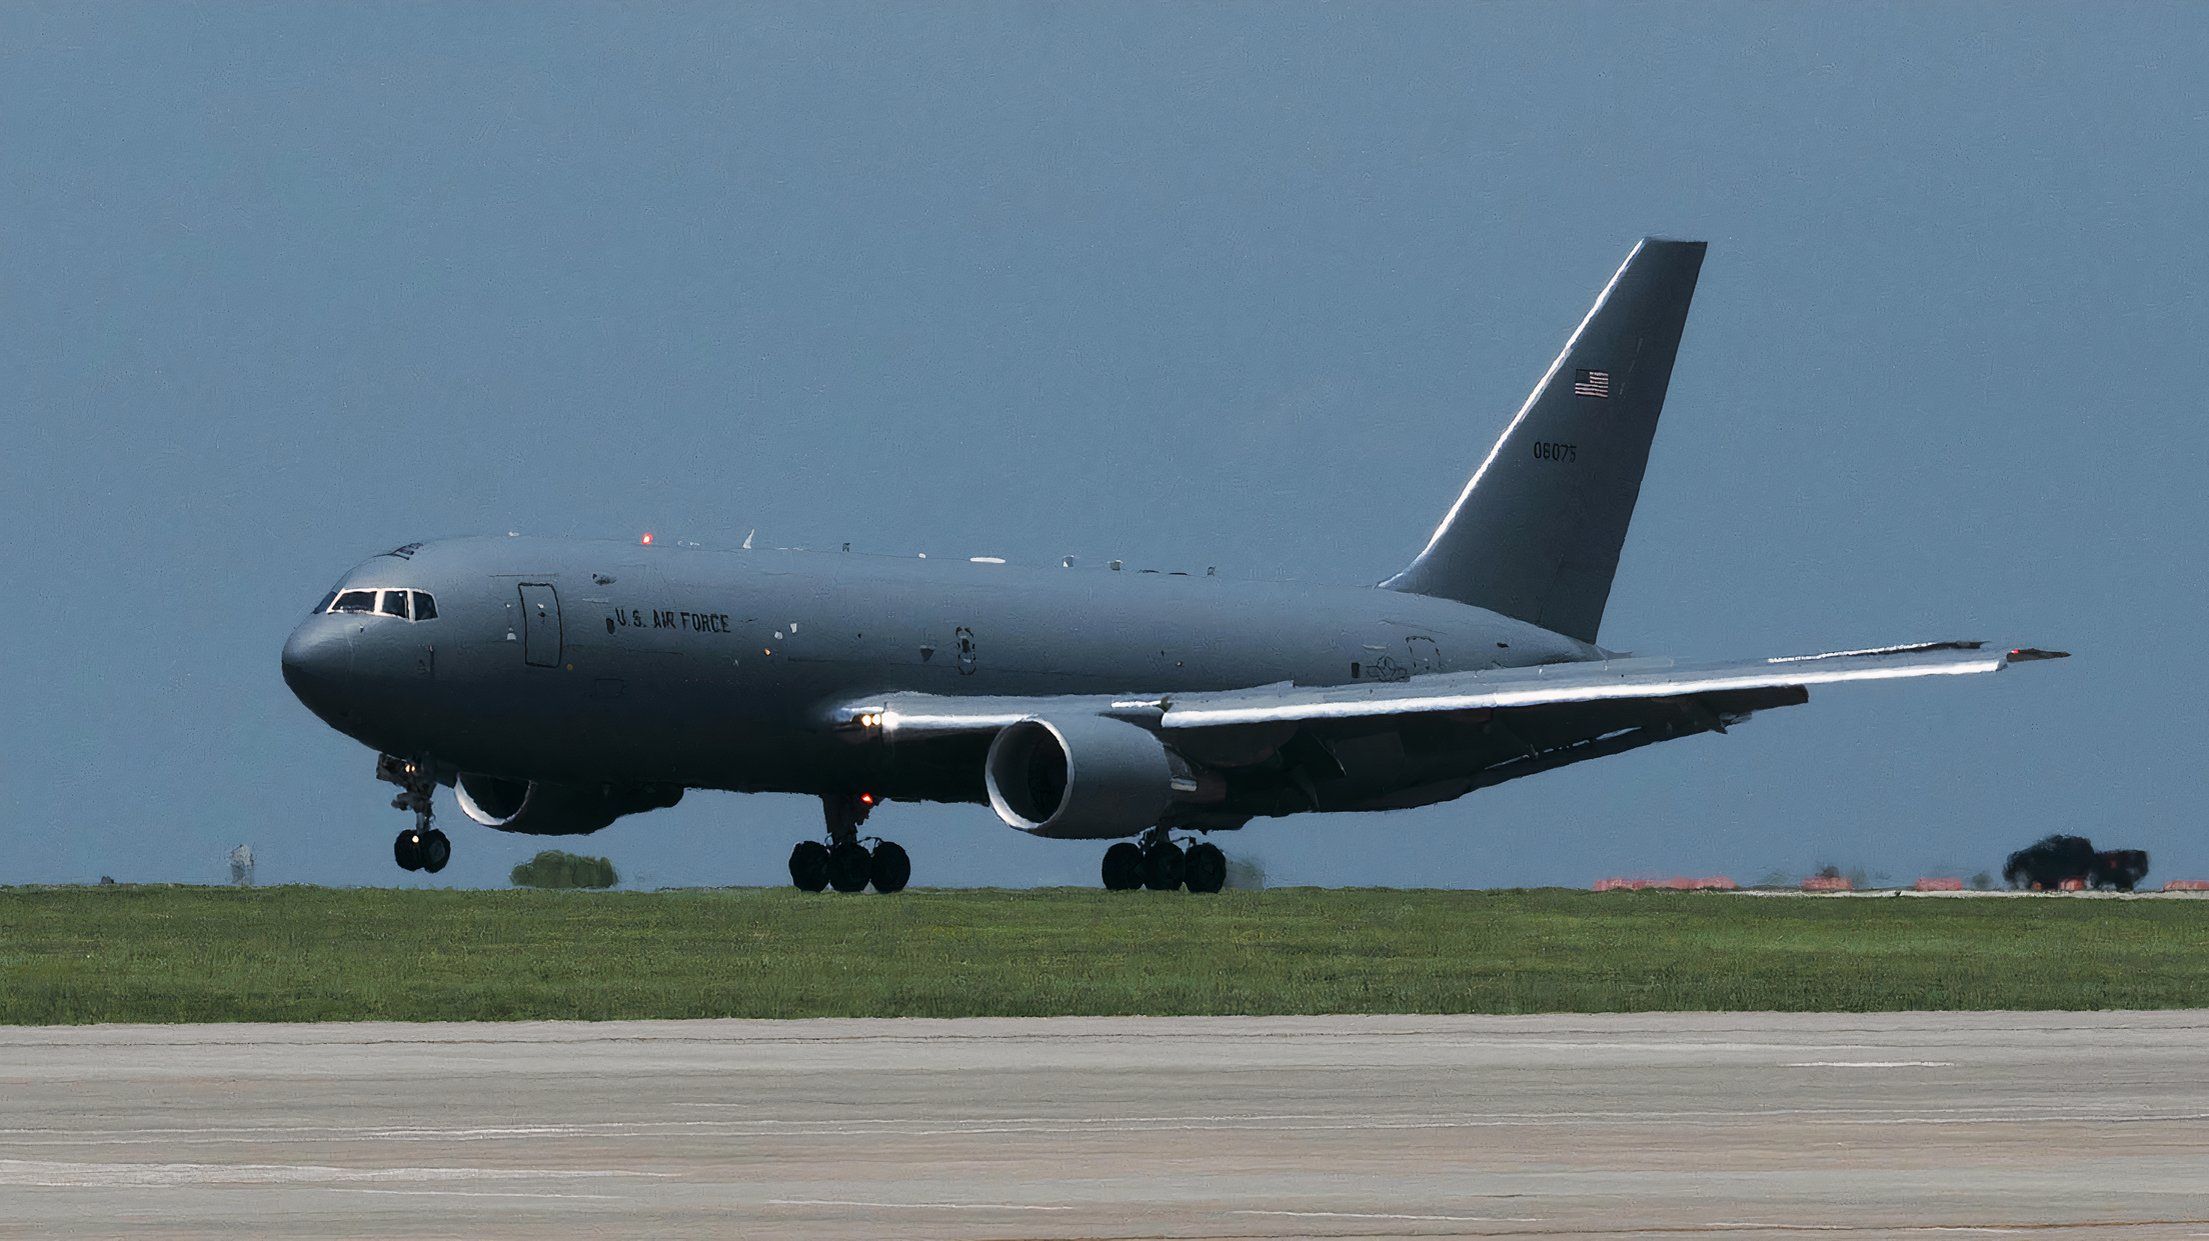 8511847 - 16x9 - 22 ARW completes first 45-hour nonstop KC-46 flight around the world [Image 1 of 8]